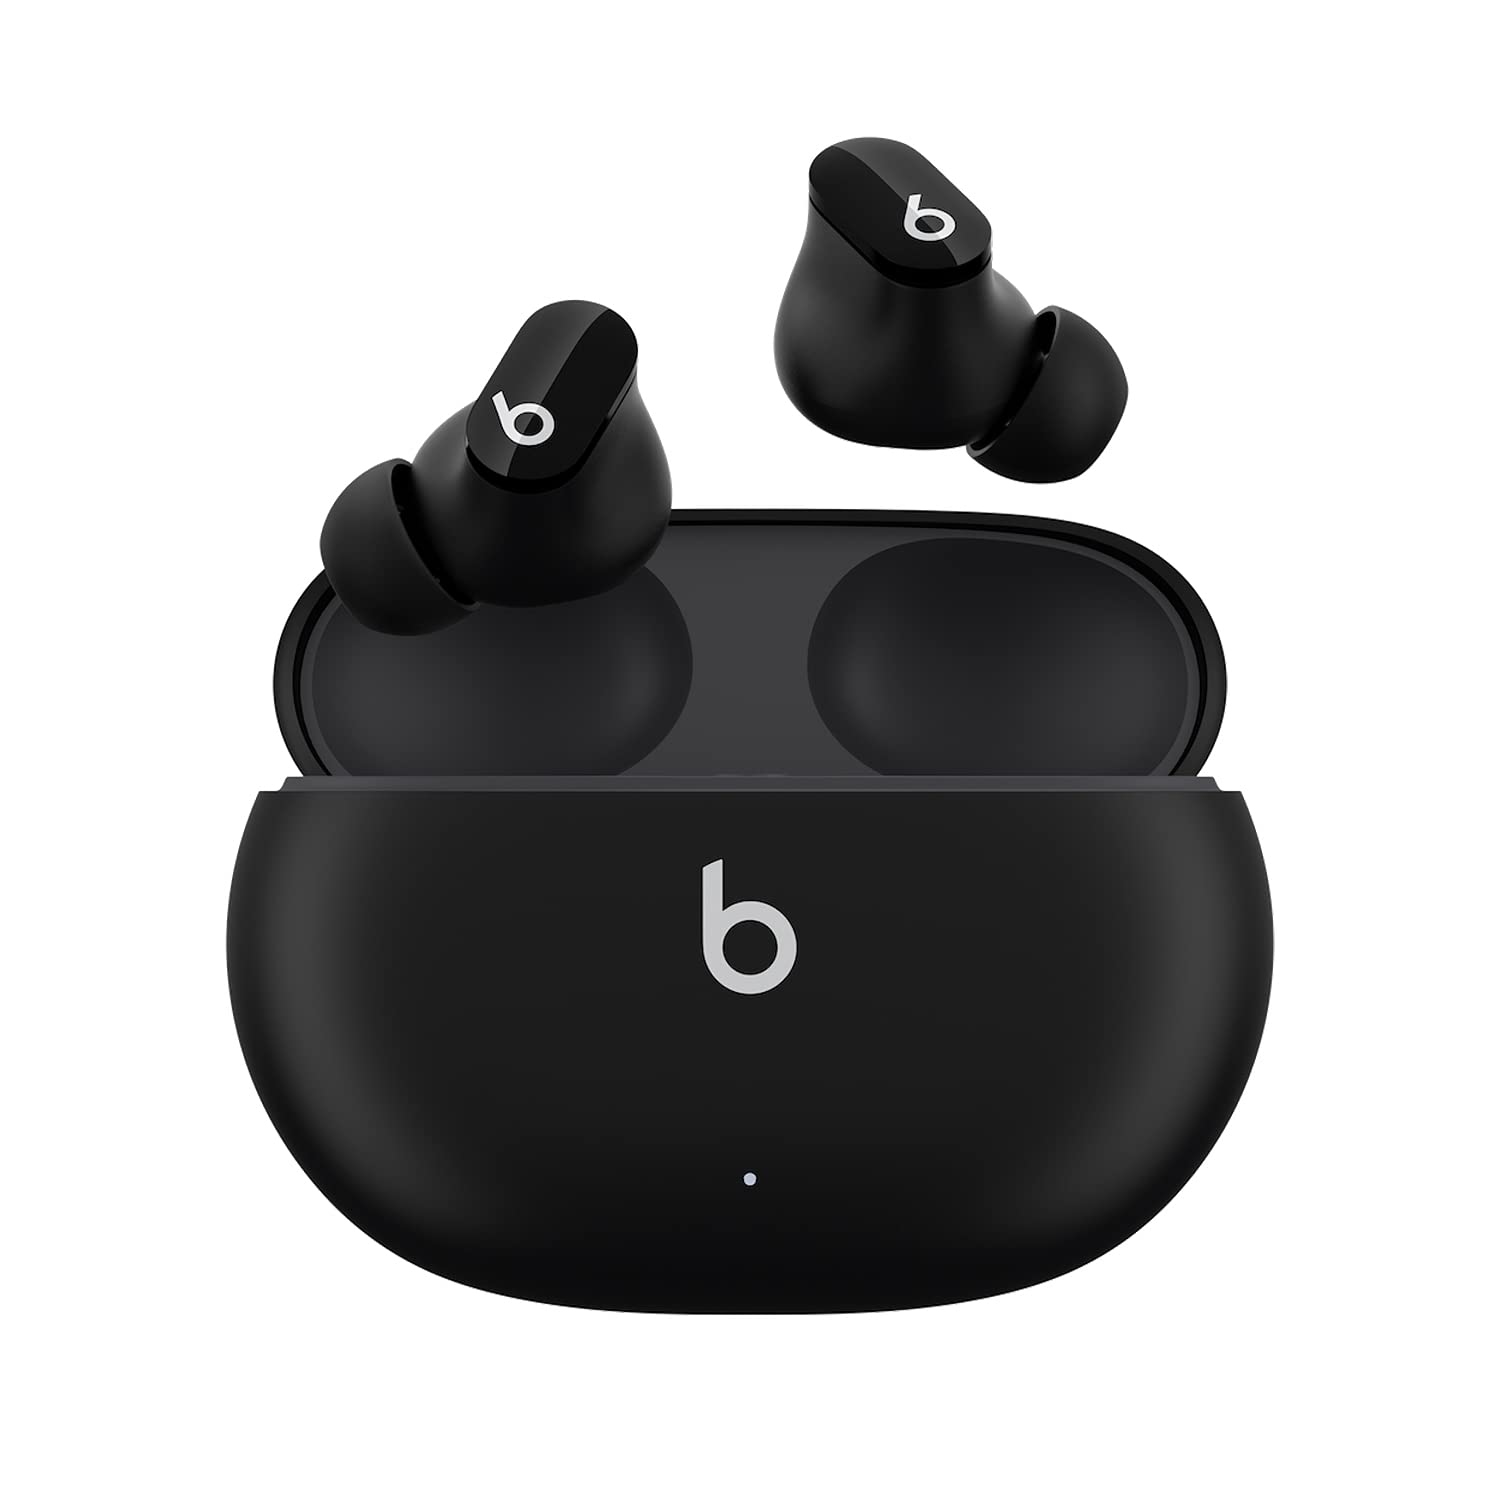 Beats Studio Buds - True Wireless Noise Cancelling Earbuds - Compatible with Apple & Android, Built-in Microphone, IPX4 Rating, Sweat Resistant Earphones, Class 1 Bluetooth Headphones - Black